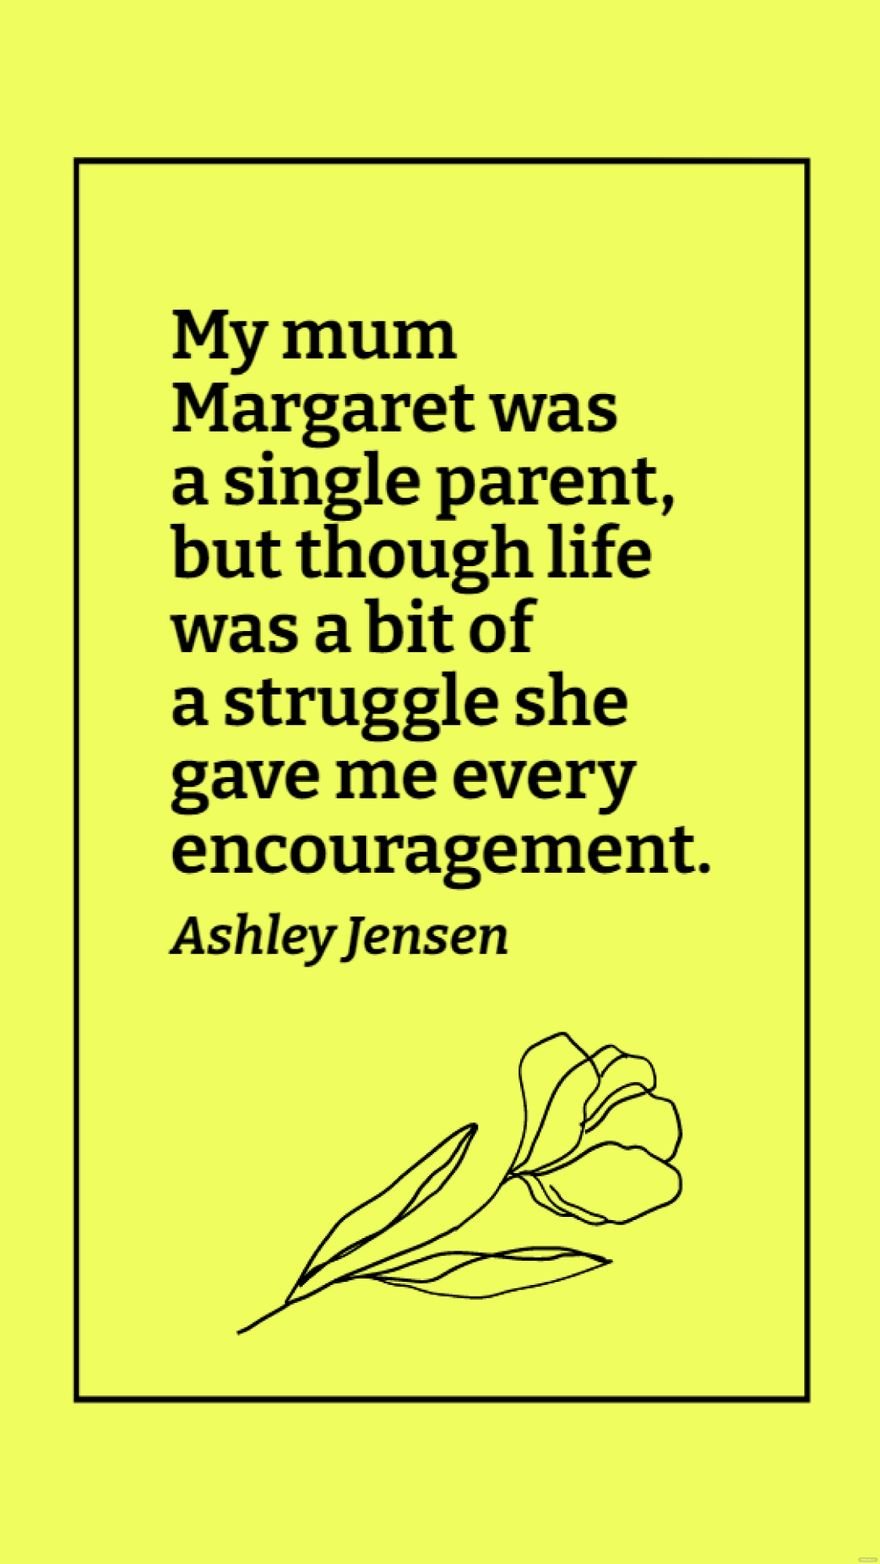 Free Ashley Jensen - My mum Margaret was a single parent, but though life was a bit of a struggle she gave me every encouragement. in JPG